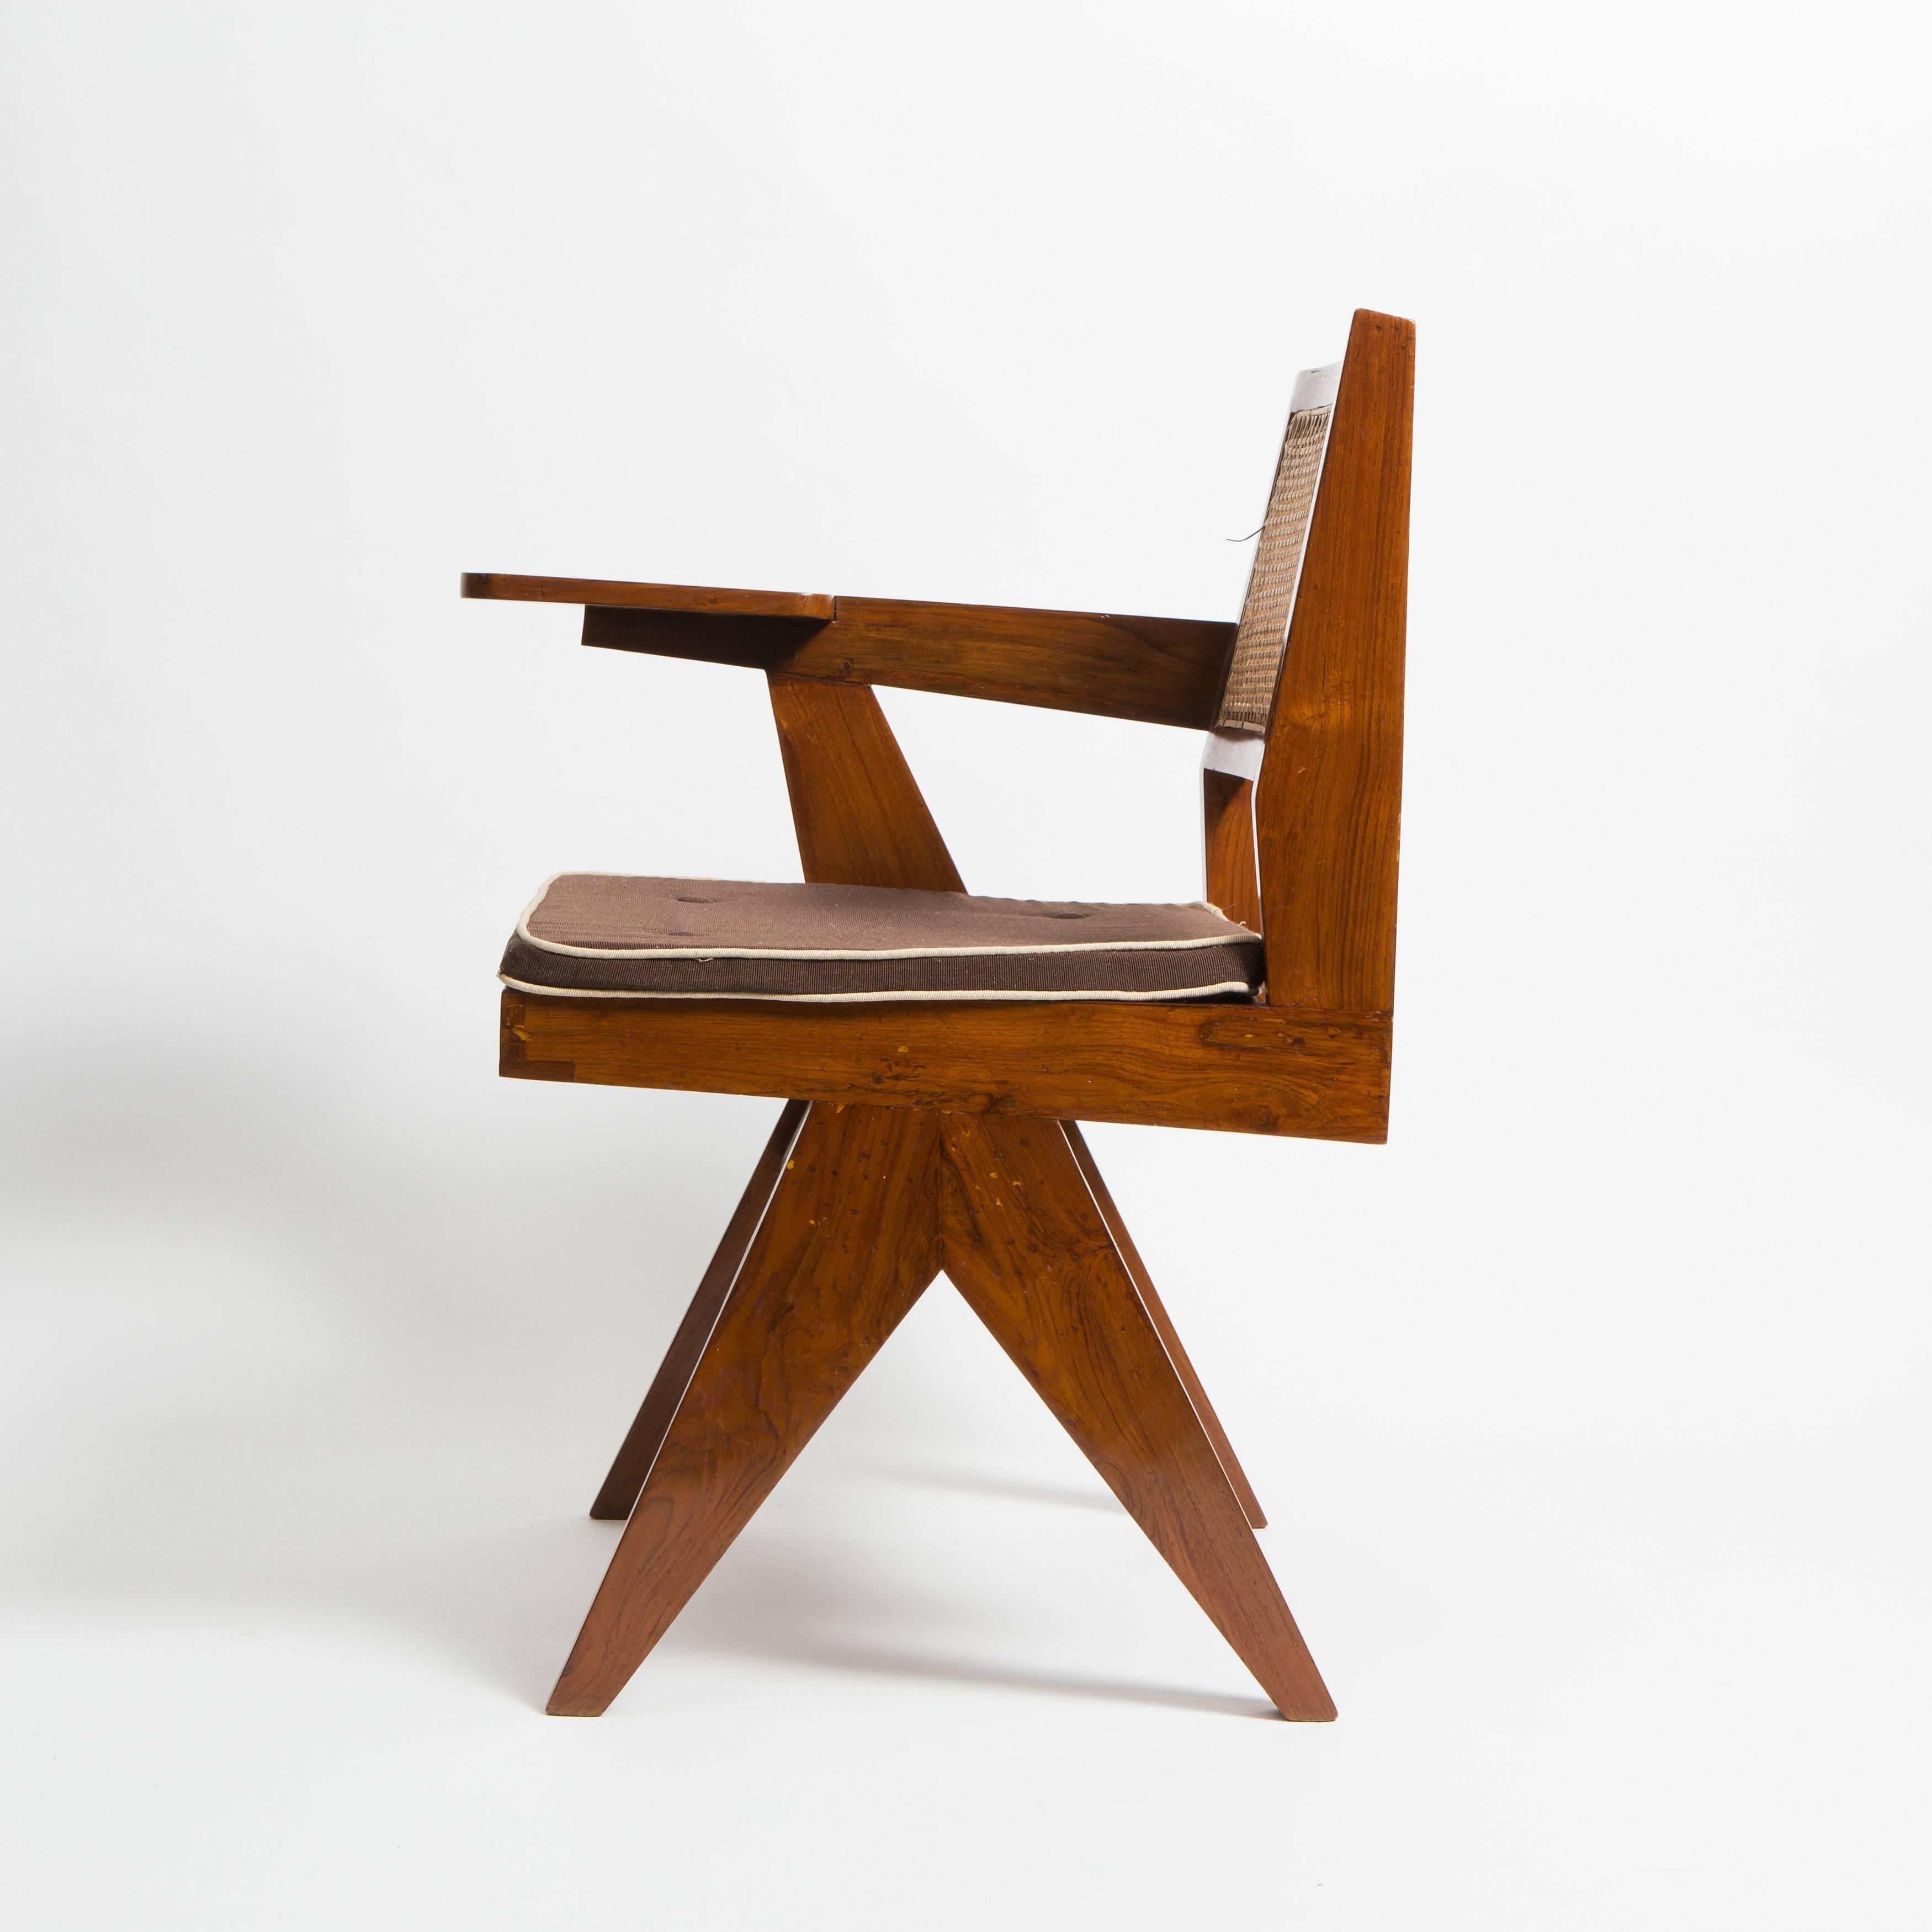 Pierre Jeanneret library chair which was designed for the Panjab University Library reading rooms but also for other libraries of the city Chandigarh. The chair is made out of solid teak and cane.
